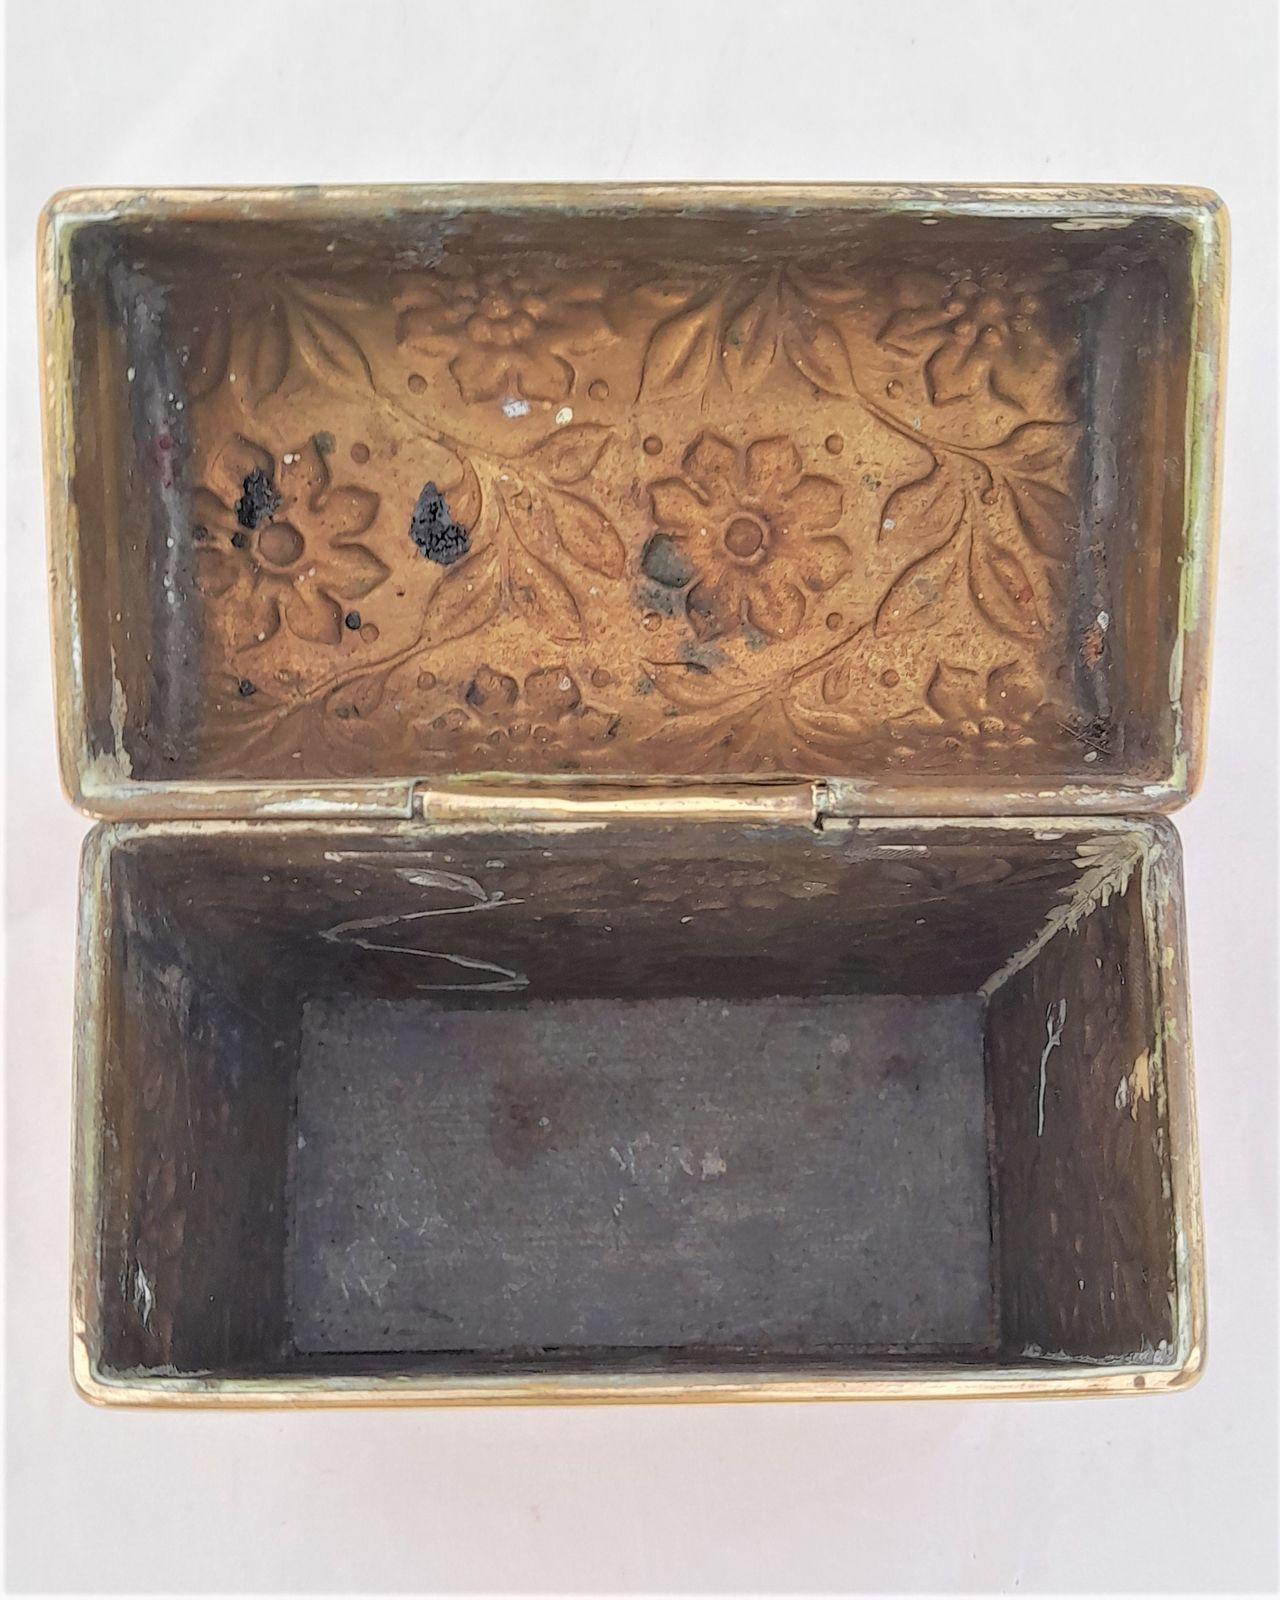 Aesthetic Movement antique brass hinged lidded Box for Stationery Passports or Notelets B7 size embossed floral decoration circa 1900